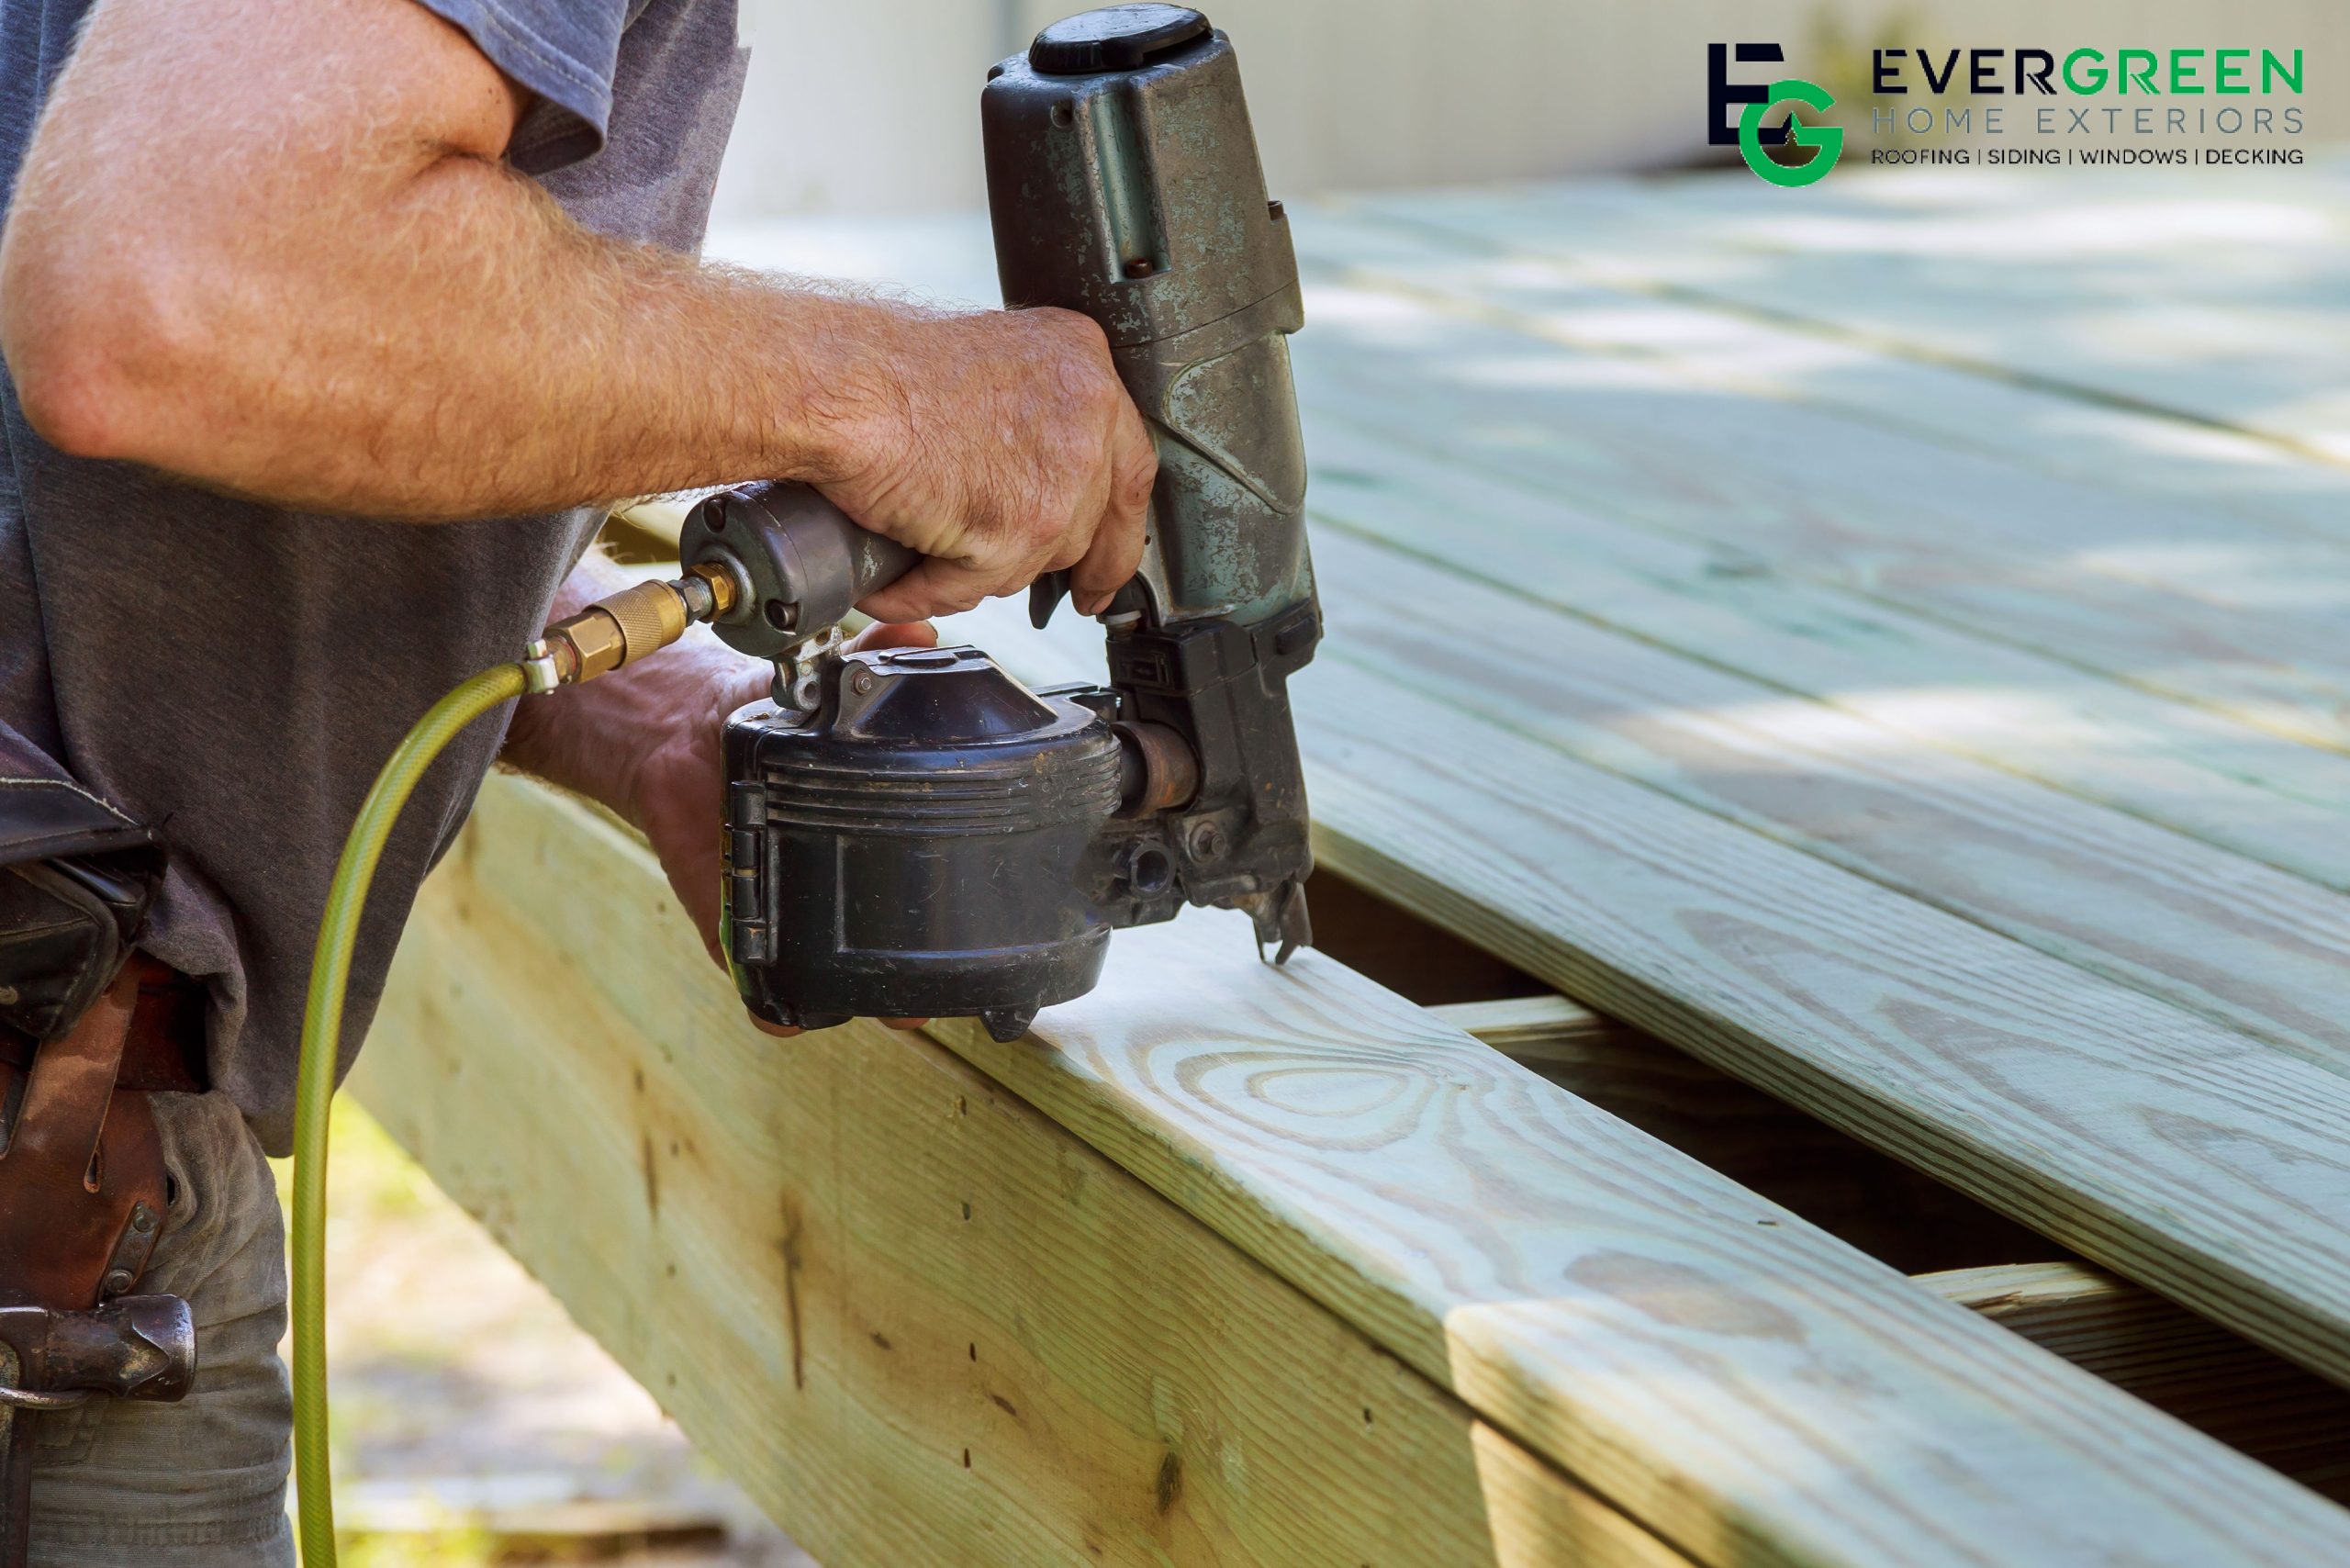 Building a Deck? Call on a Professional Contractor from Evergreen Home Exteriors!